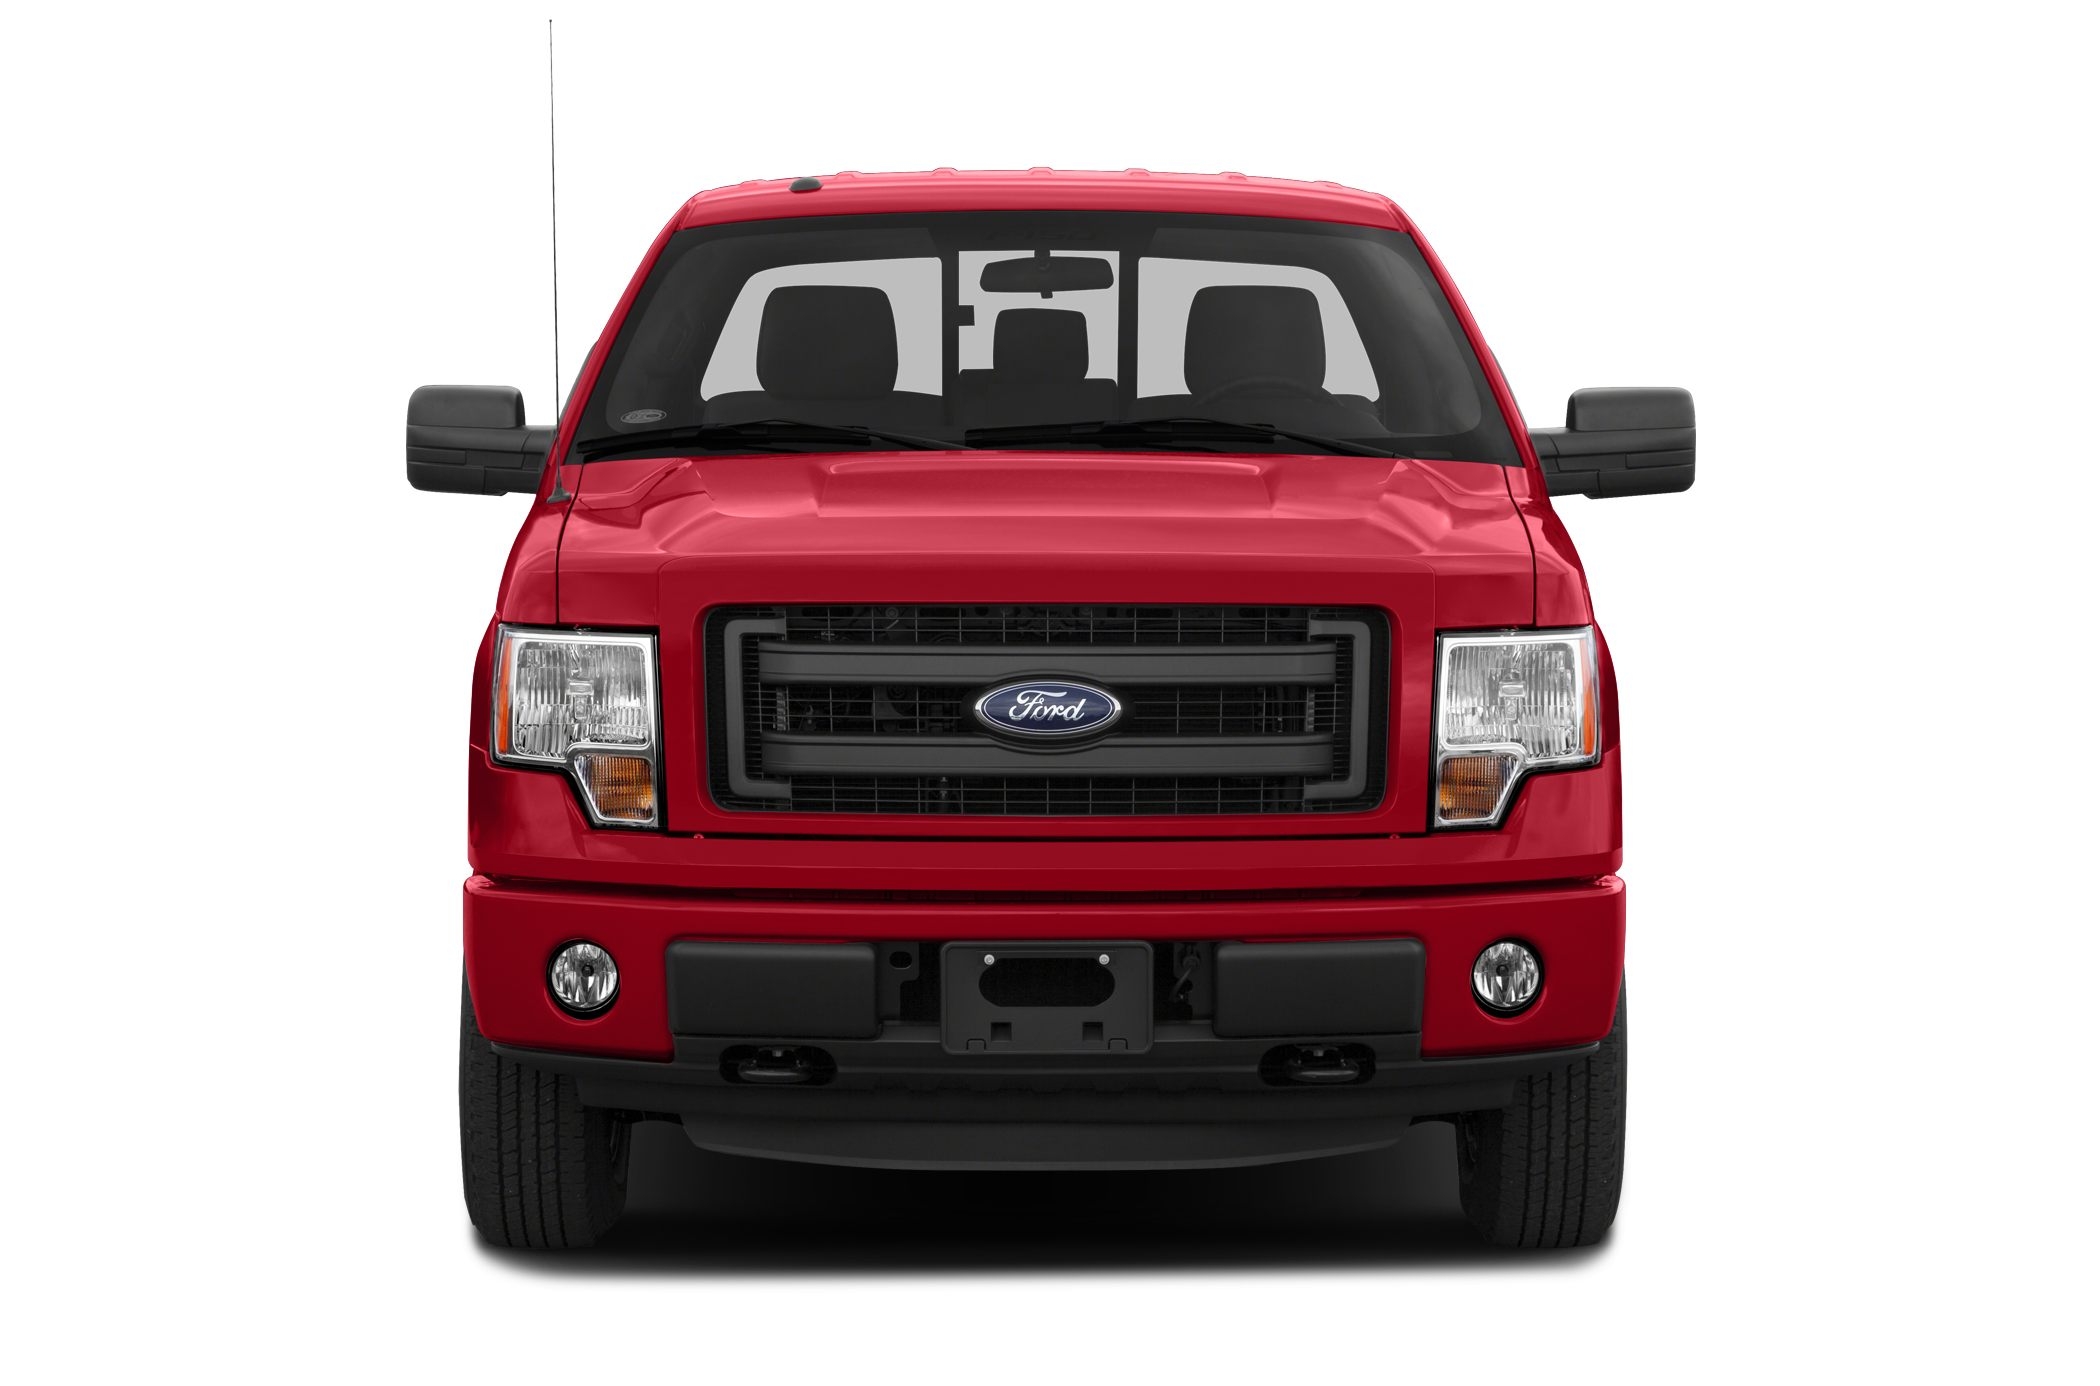 ford f 150 invoice price ford f 150 cost design ideas 15 photos of the 2015 ford f 150 2100 X 1386